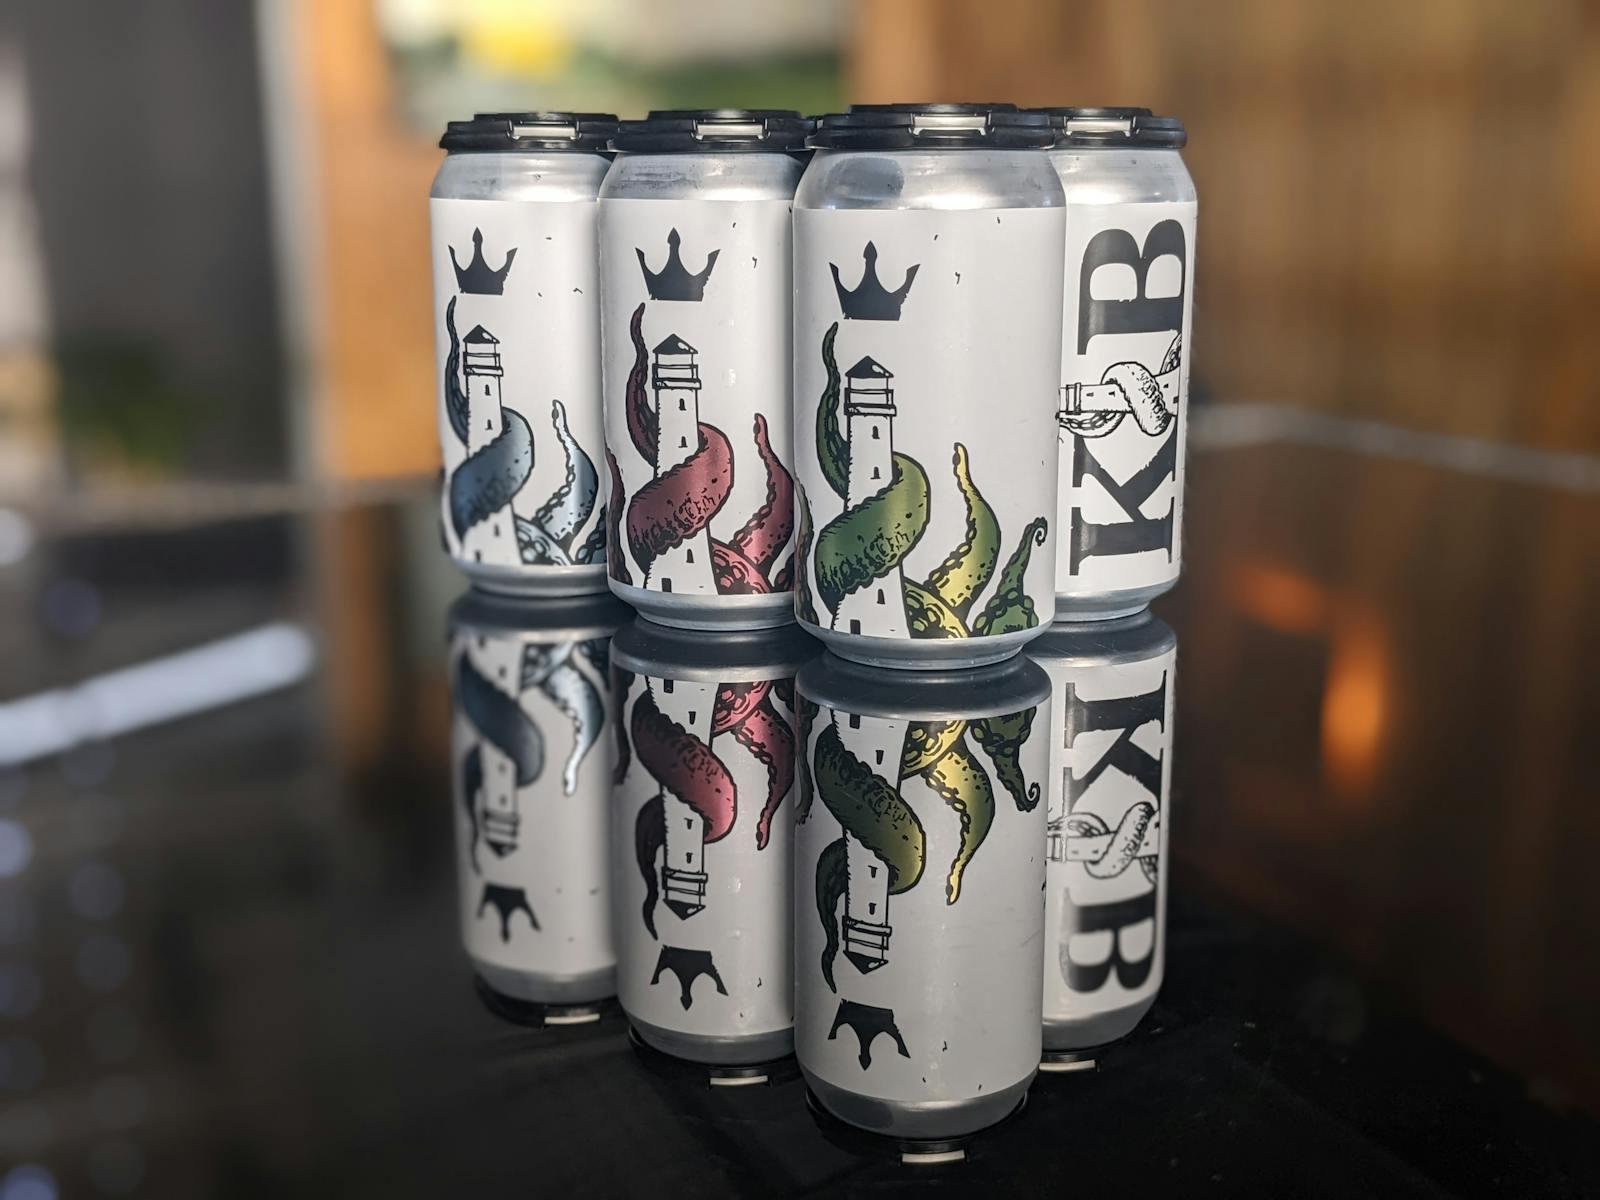 King Island Brewhouse Cans - Mixed 6 pack